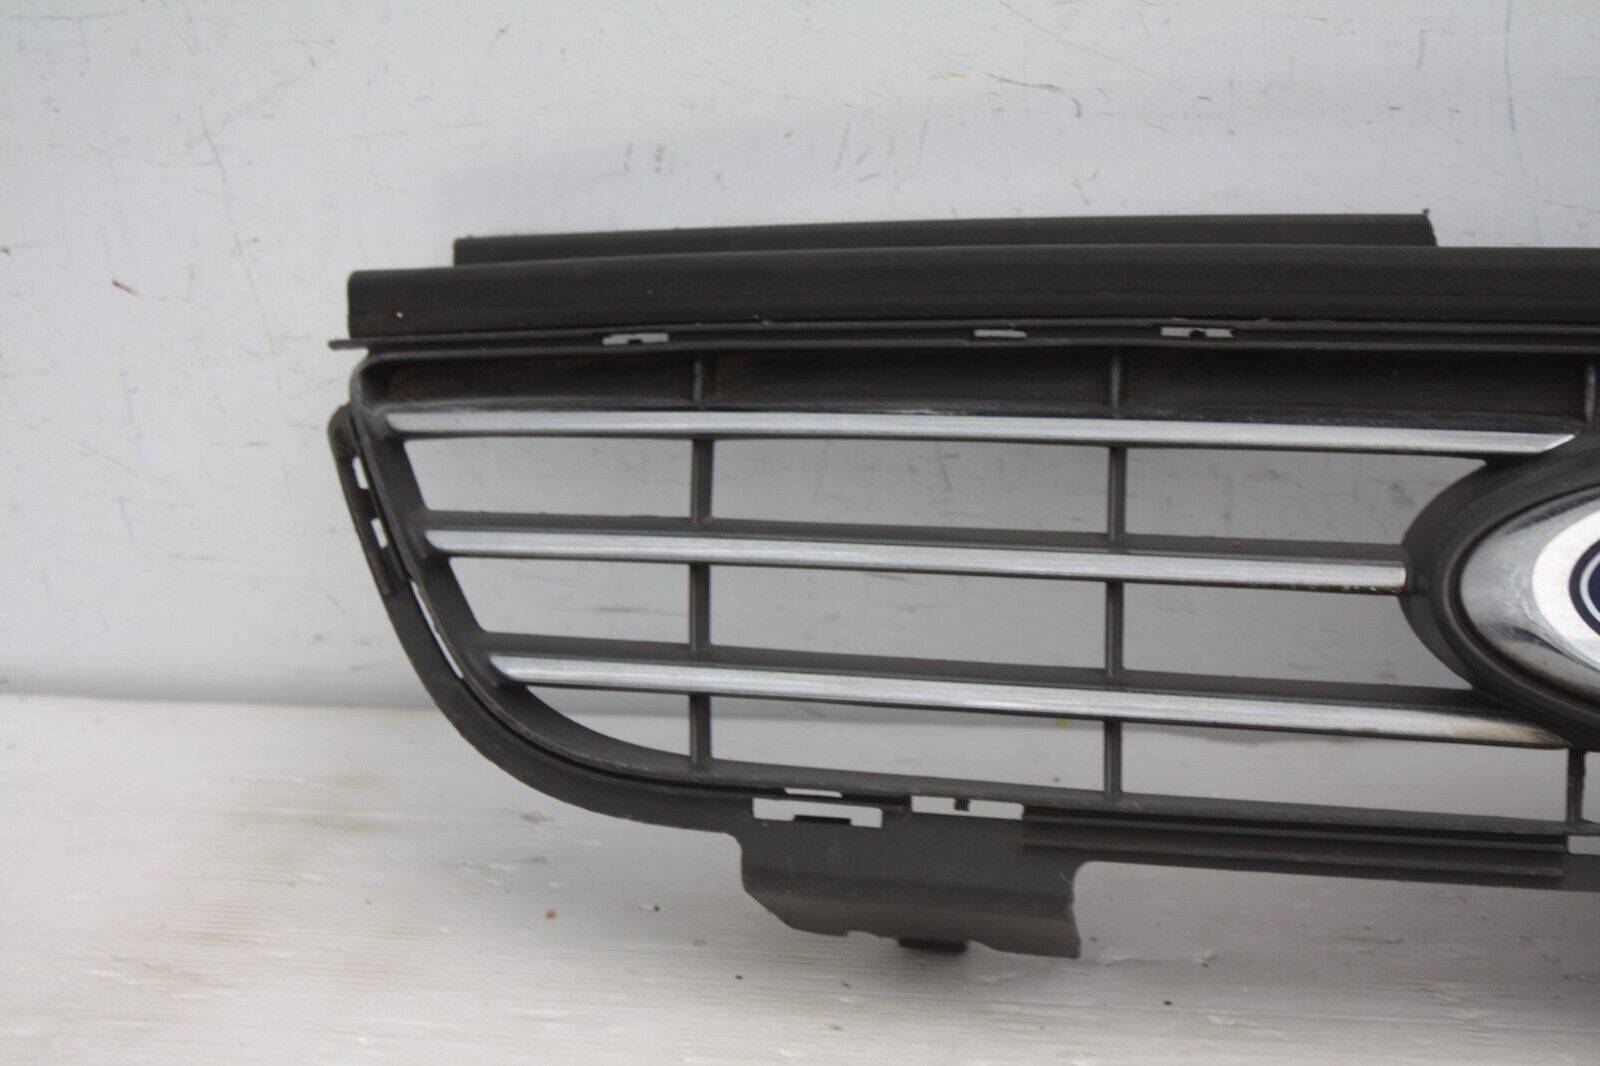 Ford-Galaxy-Front-Bumper-Grill-2010-to-2015-AM21-8200-A-Genuine-176065768256-4